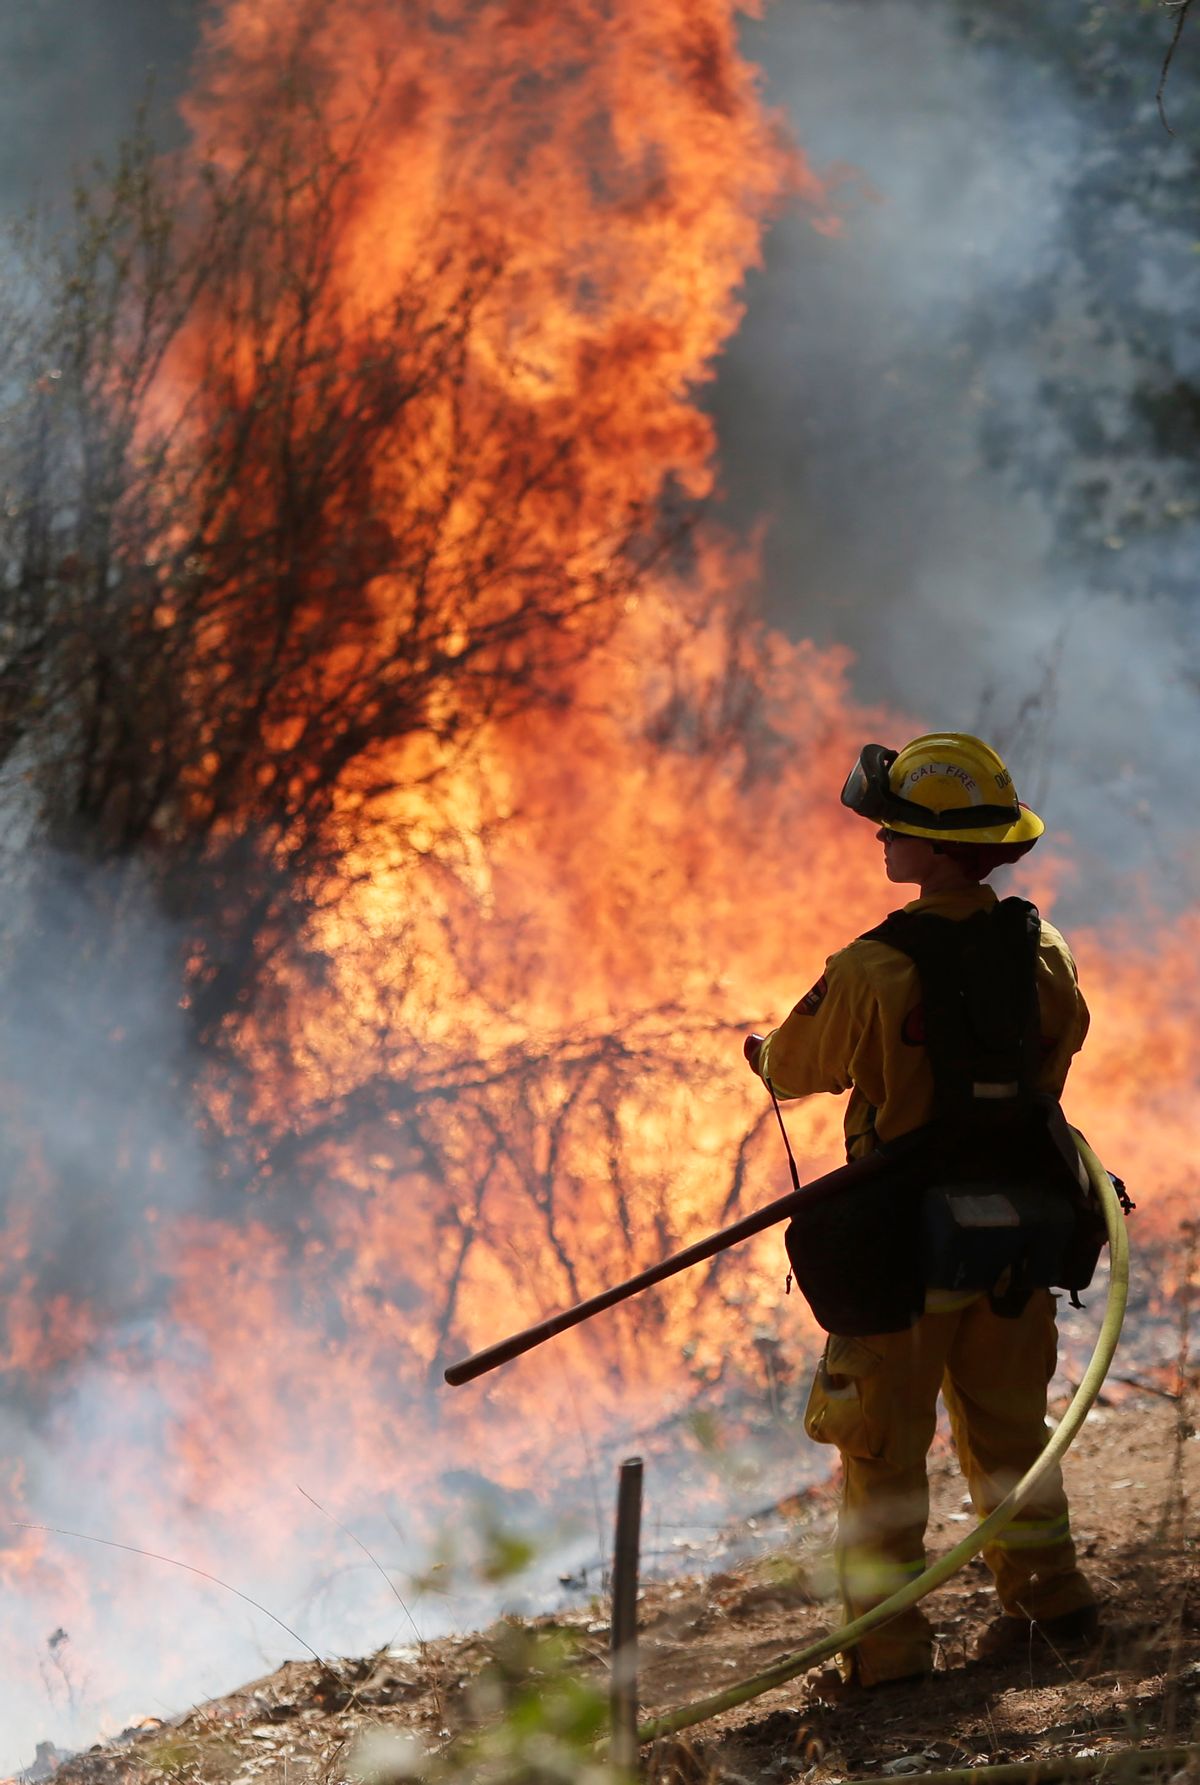 Flames from a controlled burn engulf a hillside as a firefighter watches while fighting the King Fire on Tuesday, Sept. 23, 2014, in Mosquito, Calif. Strike teams from Fresno and El Dorado Cal Fire worked in conjunction with department of corrections crews in an offensive firing tactic, intended to take away fuel from the main fire.  (AP Photo/Marcio Jose Sanchez)  (AP)